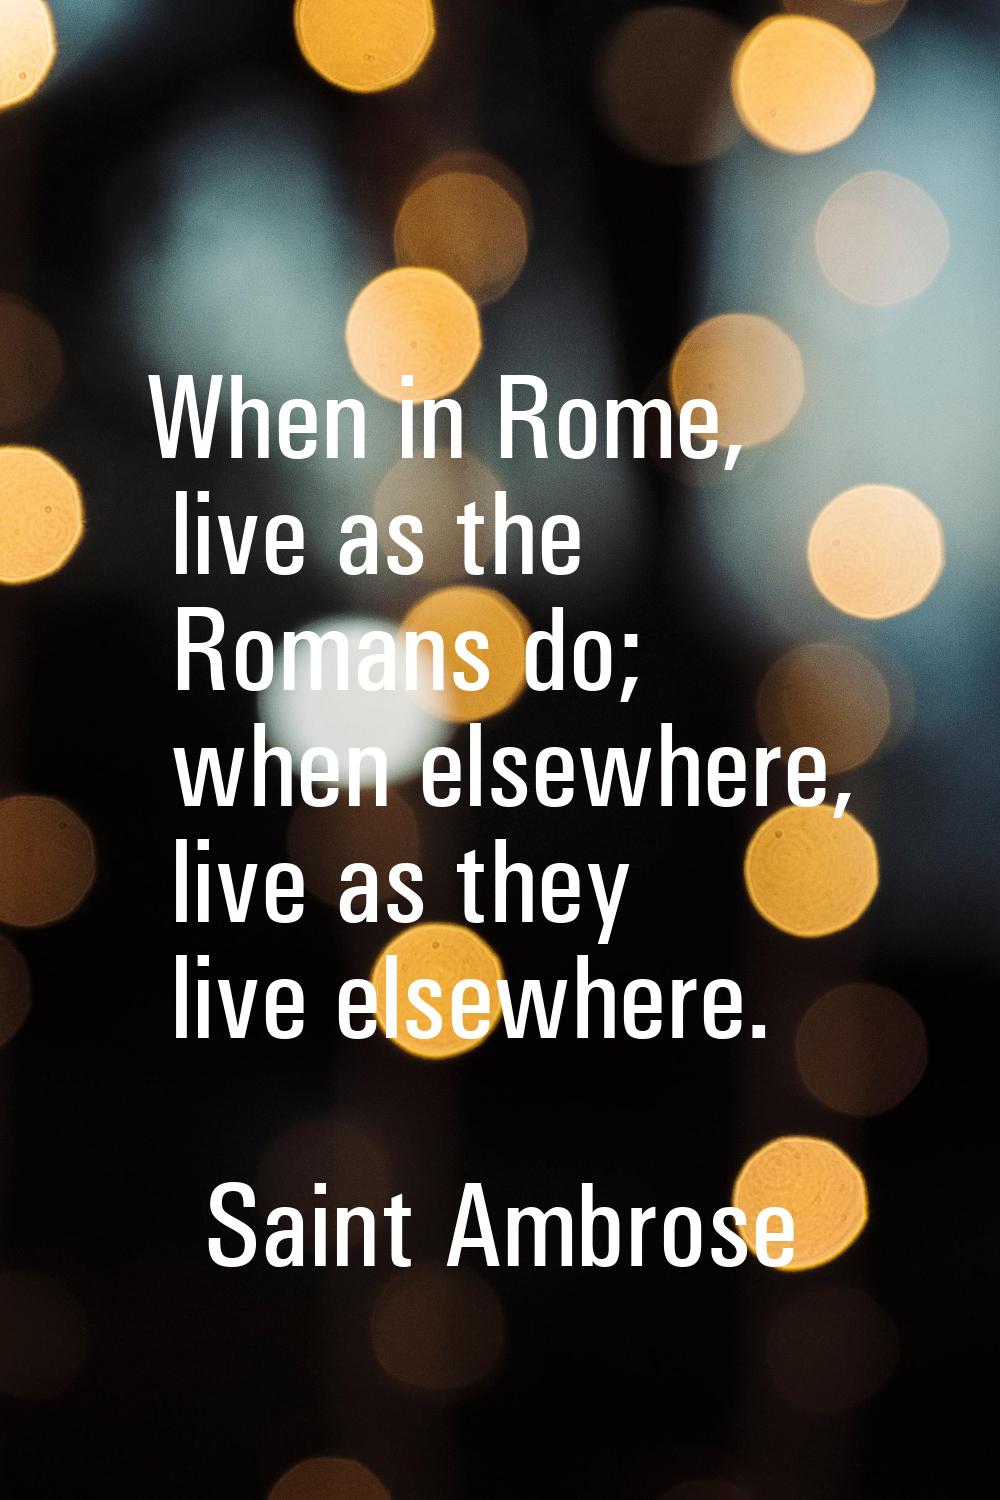 When in Rome, live as the Romans do; when elsewhere, live as they live elsewhere.